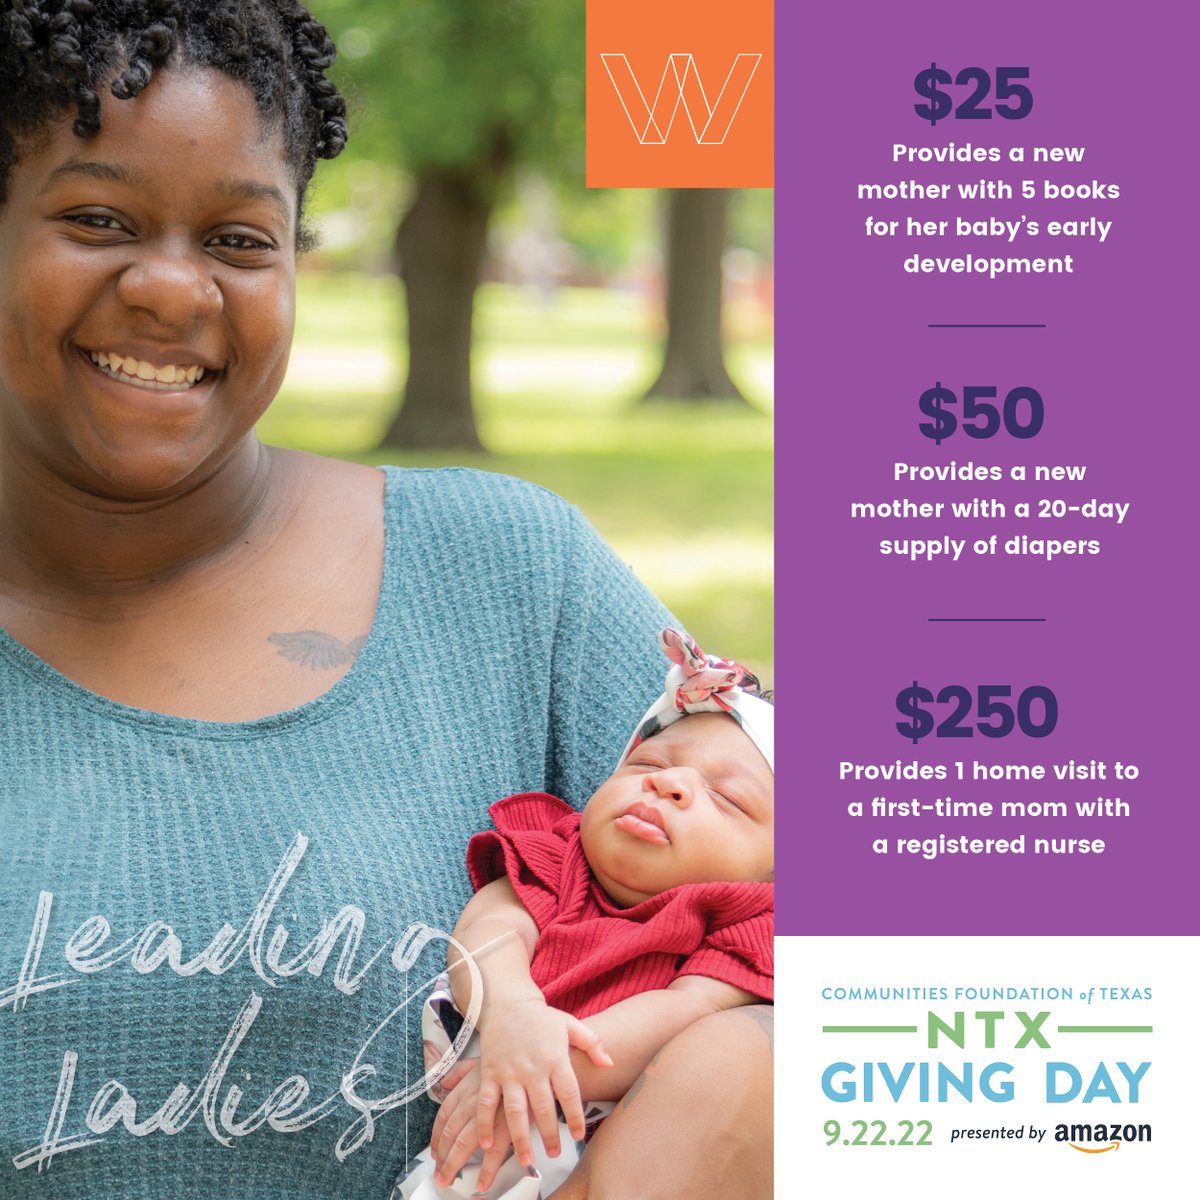 test Twitter Media - Support the amazing mothers of WiNGS through @NTxGivingDay! Every dollar makes a difference! 
#NTXGivingDay #WiNGSDallas #Empowerwomen #amazingmoms #leadingladies #momlife https://t.co/j5q1wVM5Eq